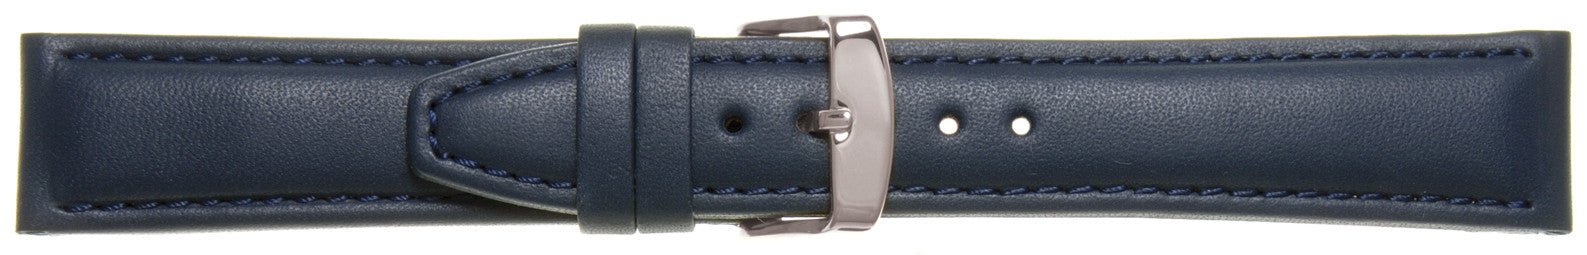 Anti-Allergy Padded Calf Leather Watch Strap LS1357 - Hot Watches